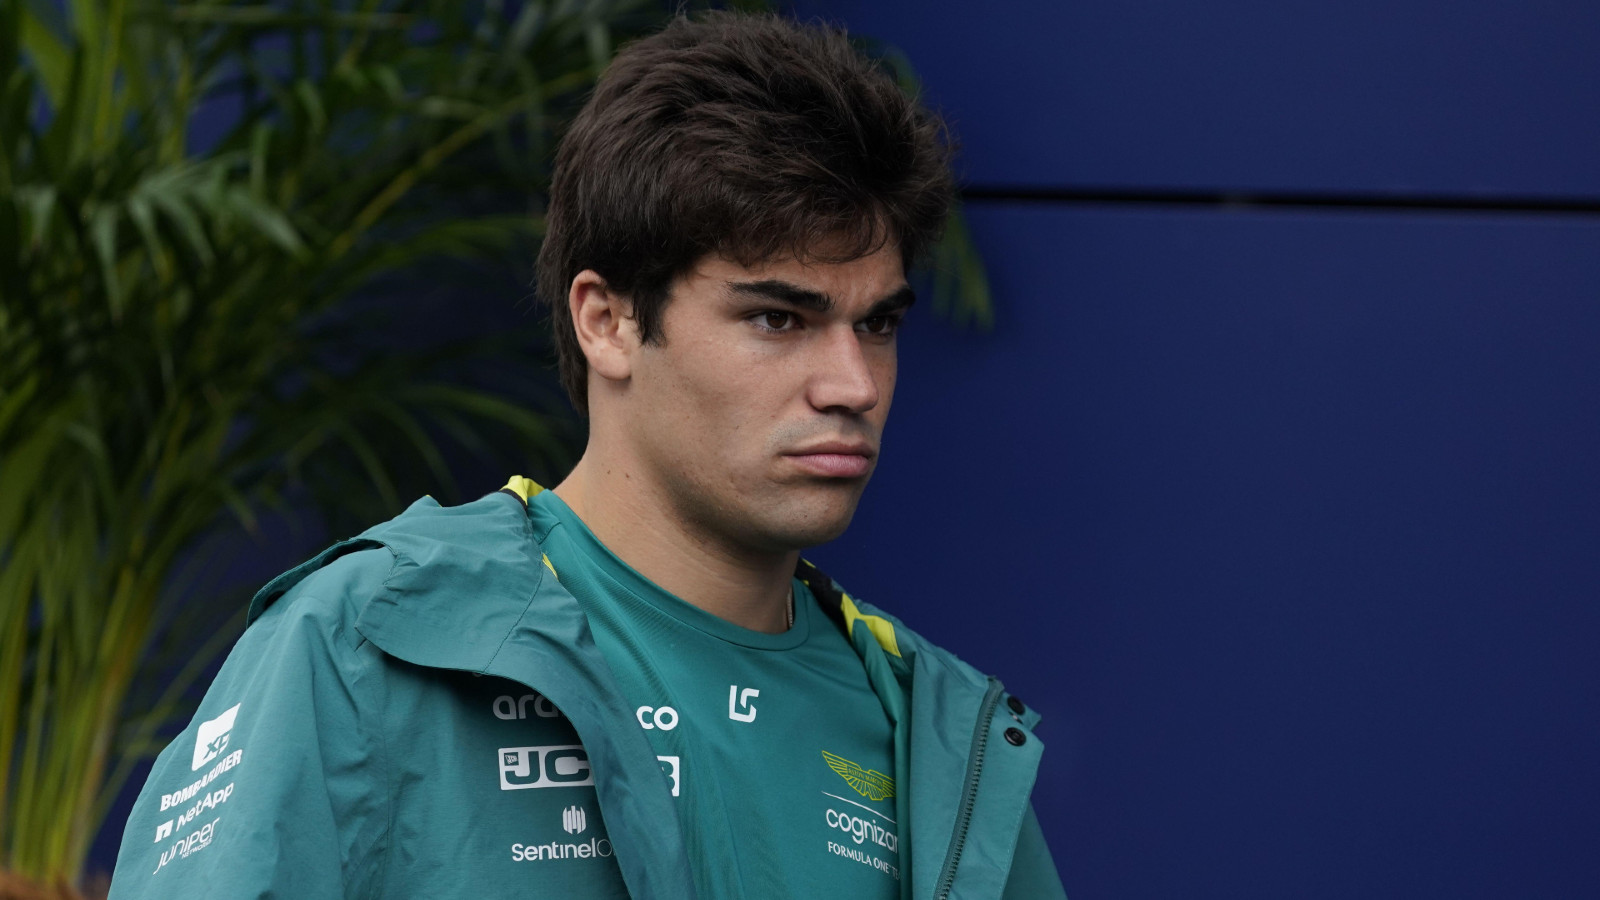 Lance Stroll, Aston Martin driver, in the F1 paddock at Spa-Francorchamps for the Belgian Grand Prix.